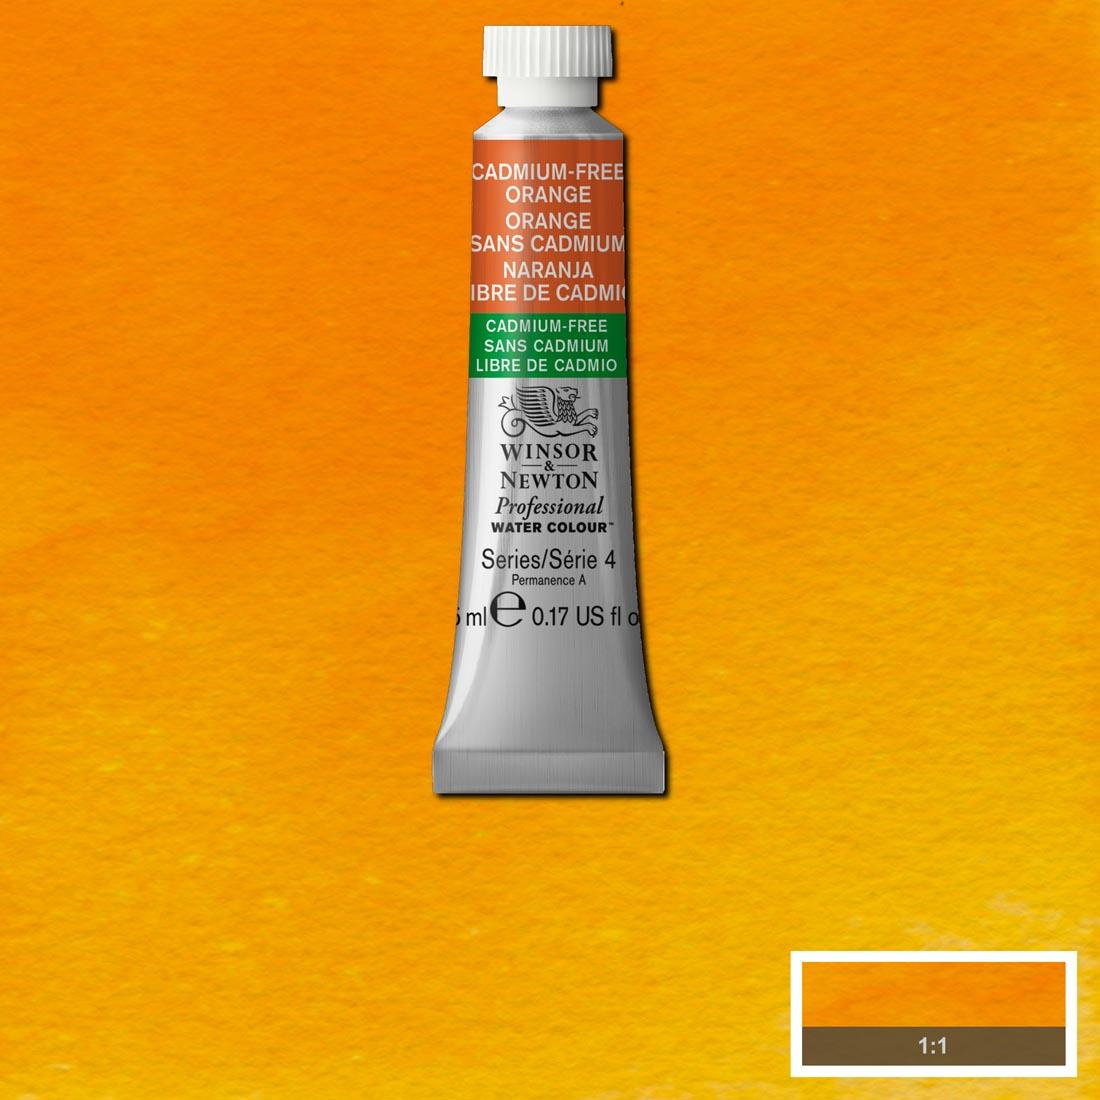 Tube of Cadmium-Free Orange Winsor & Newton Professional Water Colour with a paint swatch for the background